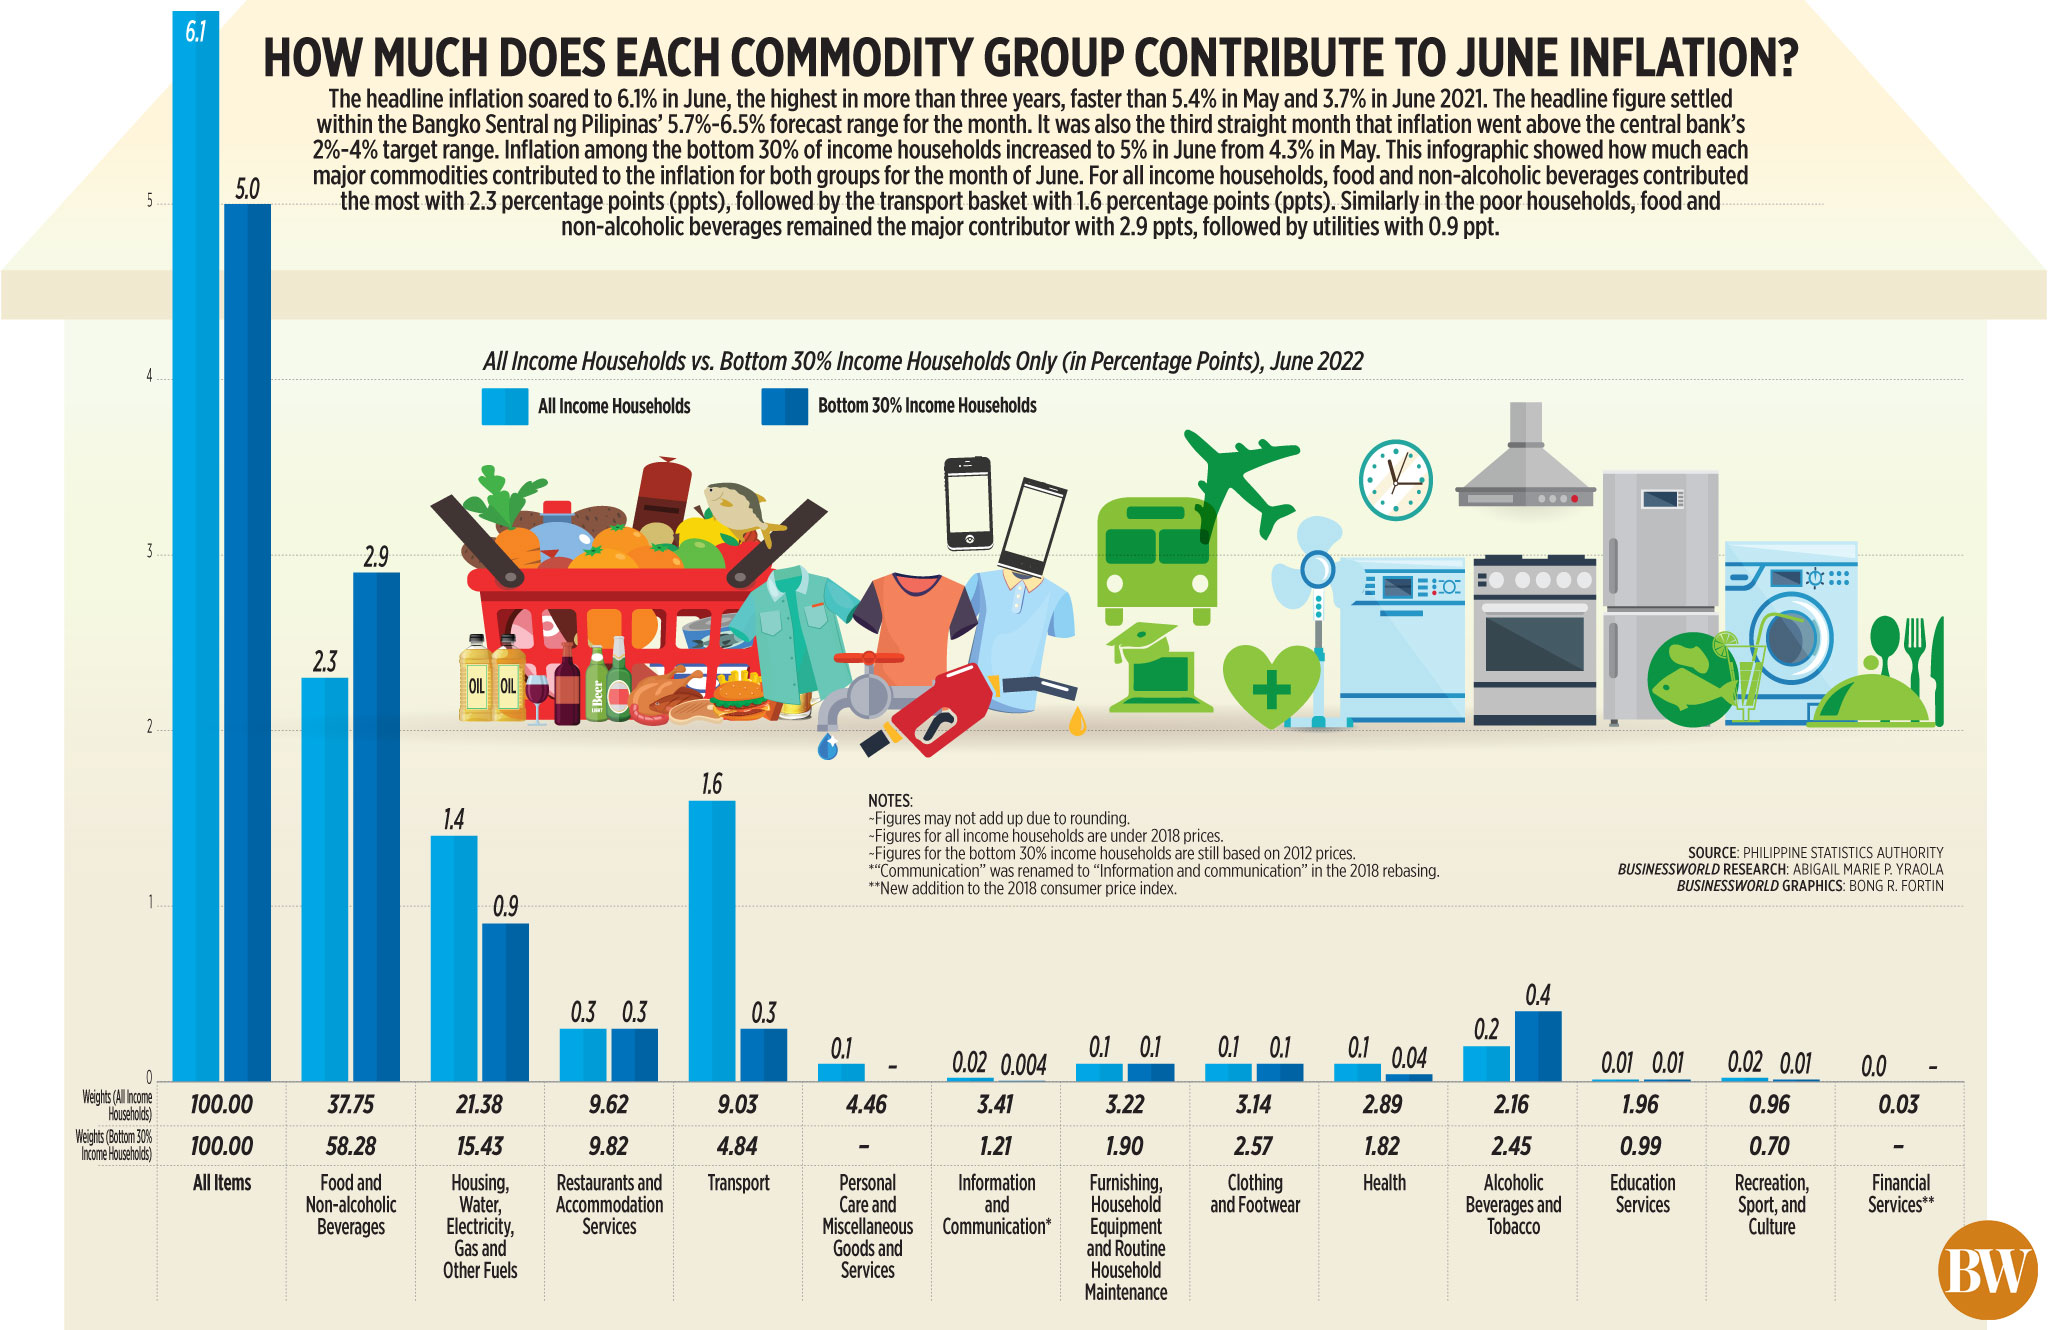 How much does each commodity group contribute to June inflation?